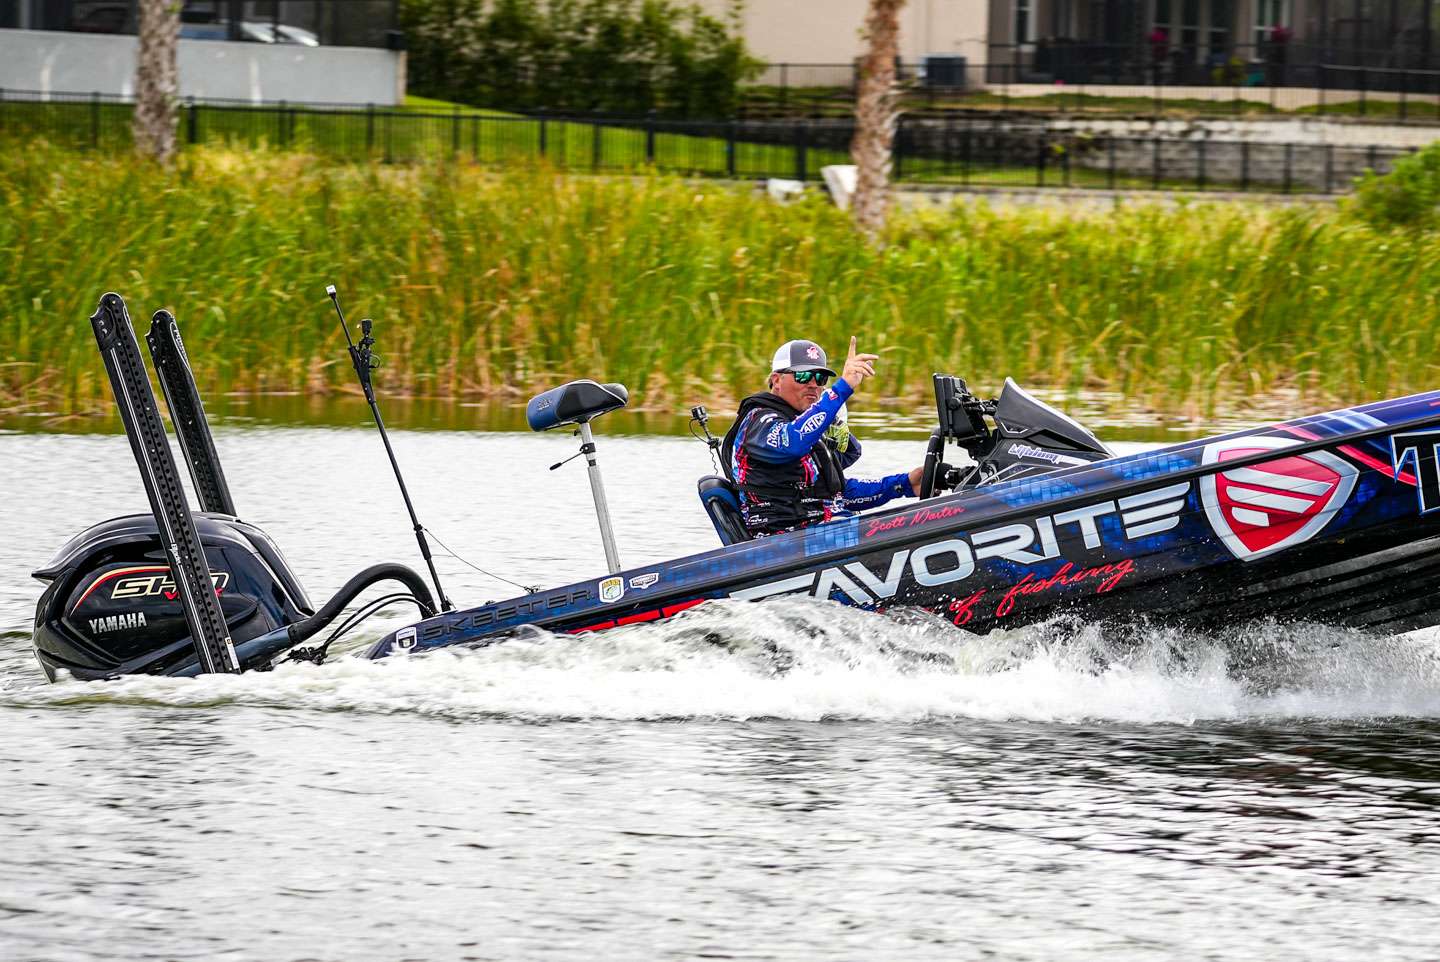 Martin wouldn’t stay in an area for long before making a small move. Later on in the day on Bassmaster Live, Martin mentioned that he was fishing for fish that he shook-off during practice.